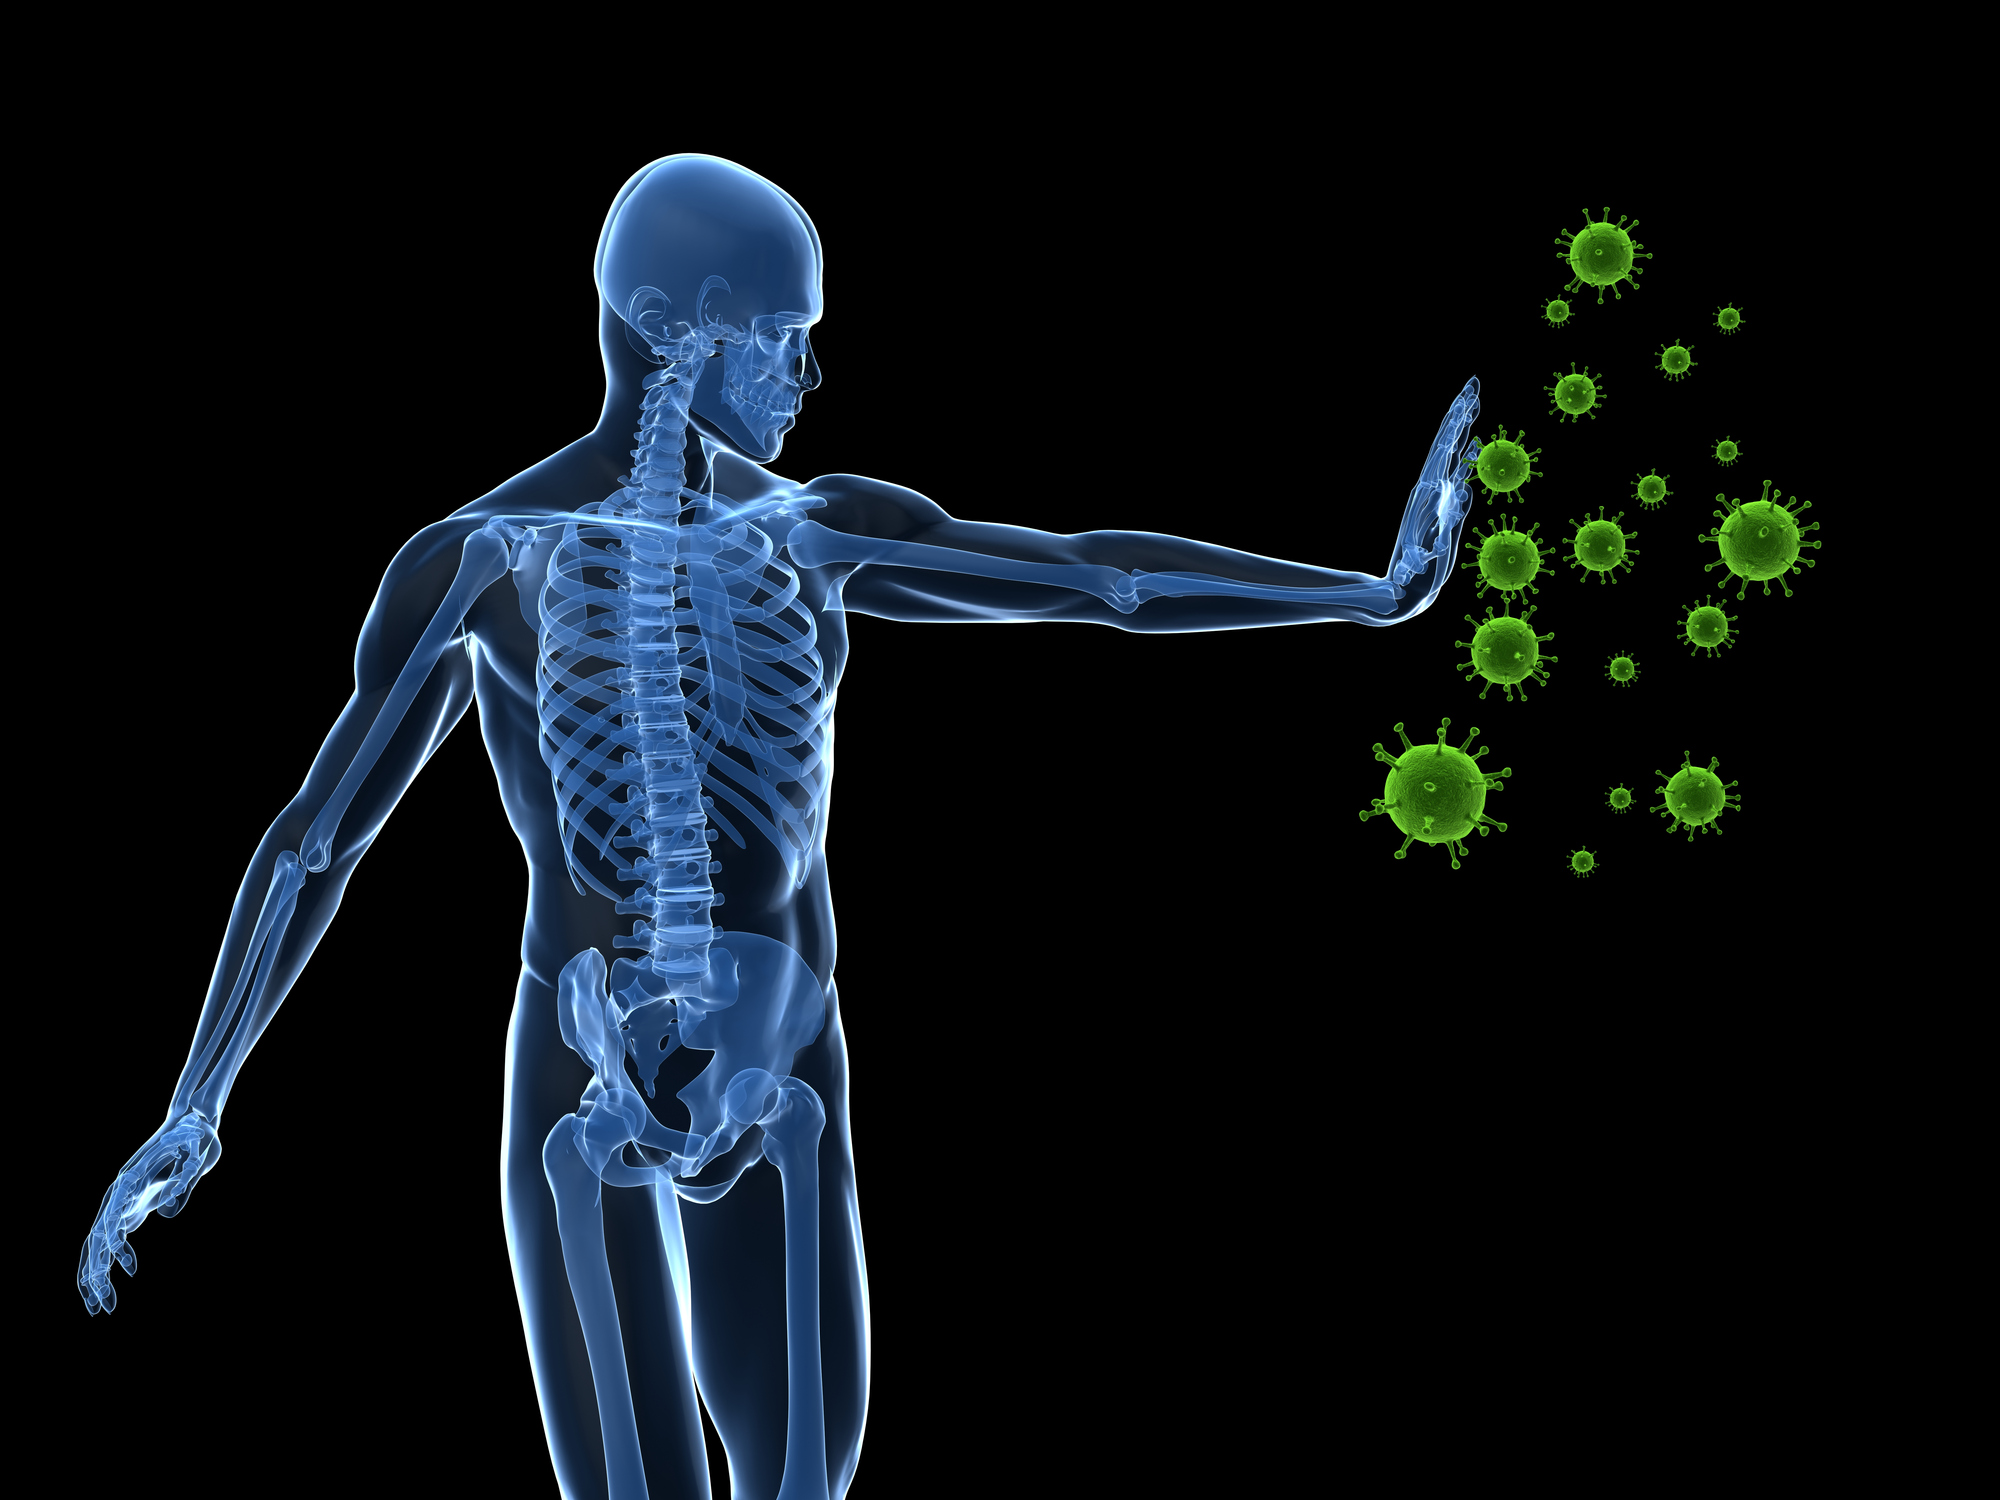 3 Ways to boost Your Immune System to fight COVOD-19